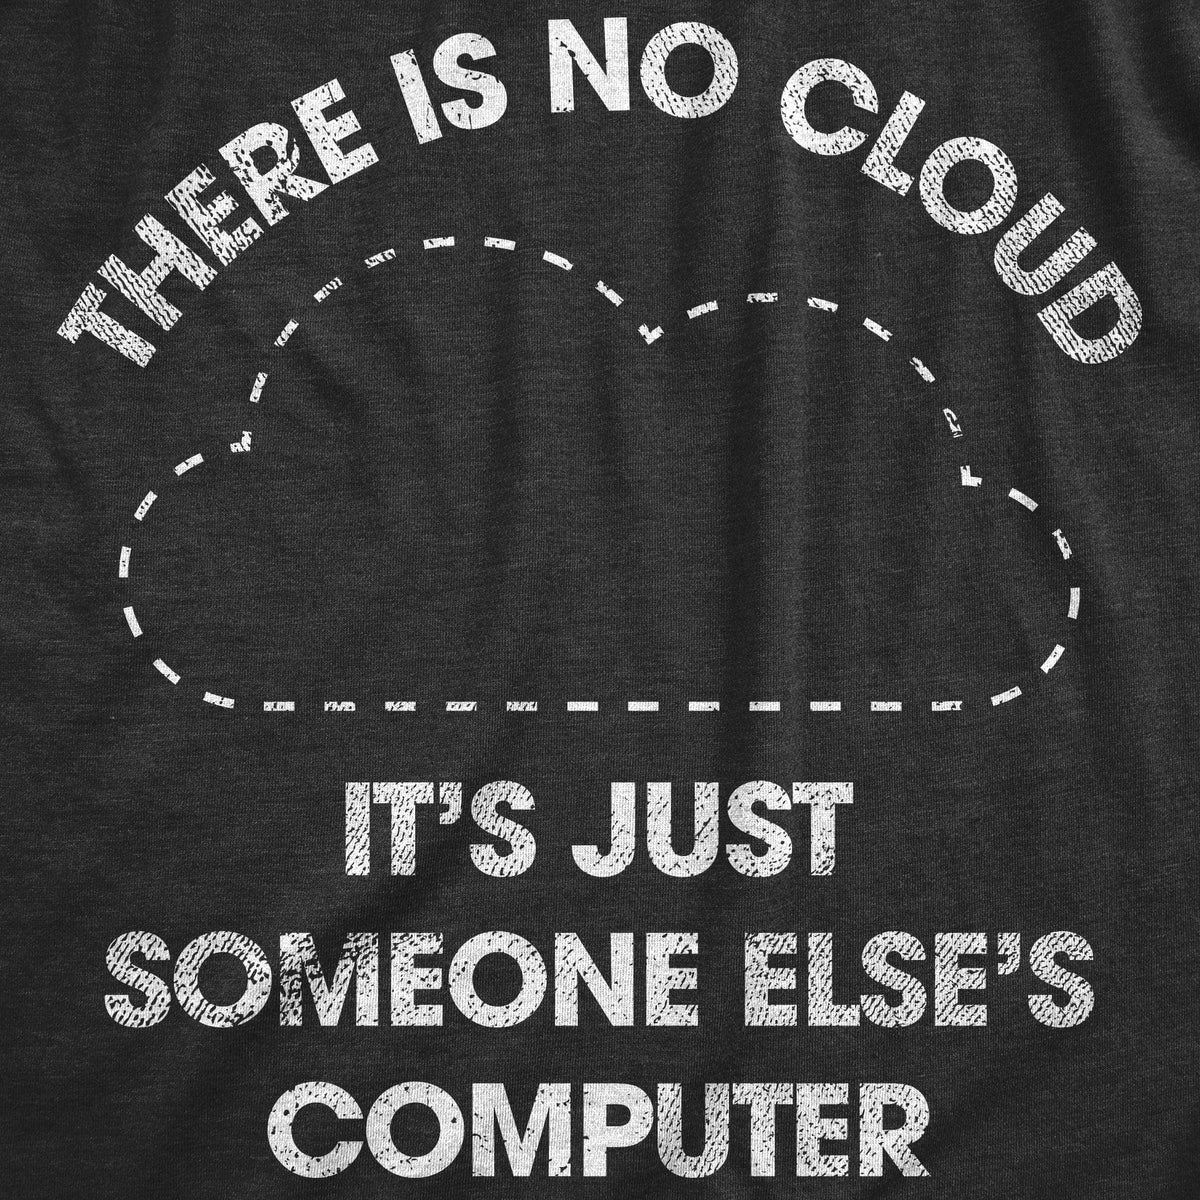 There Is No Cloud Its Just Someone Elses Computer Men&#39;s Tshirt  -  Crazy Dog T-Shirts